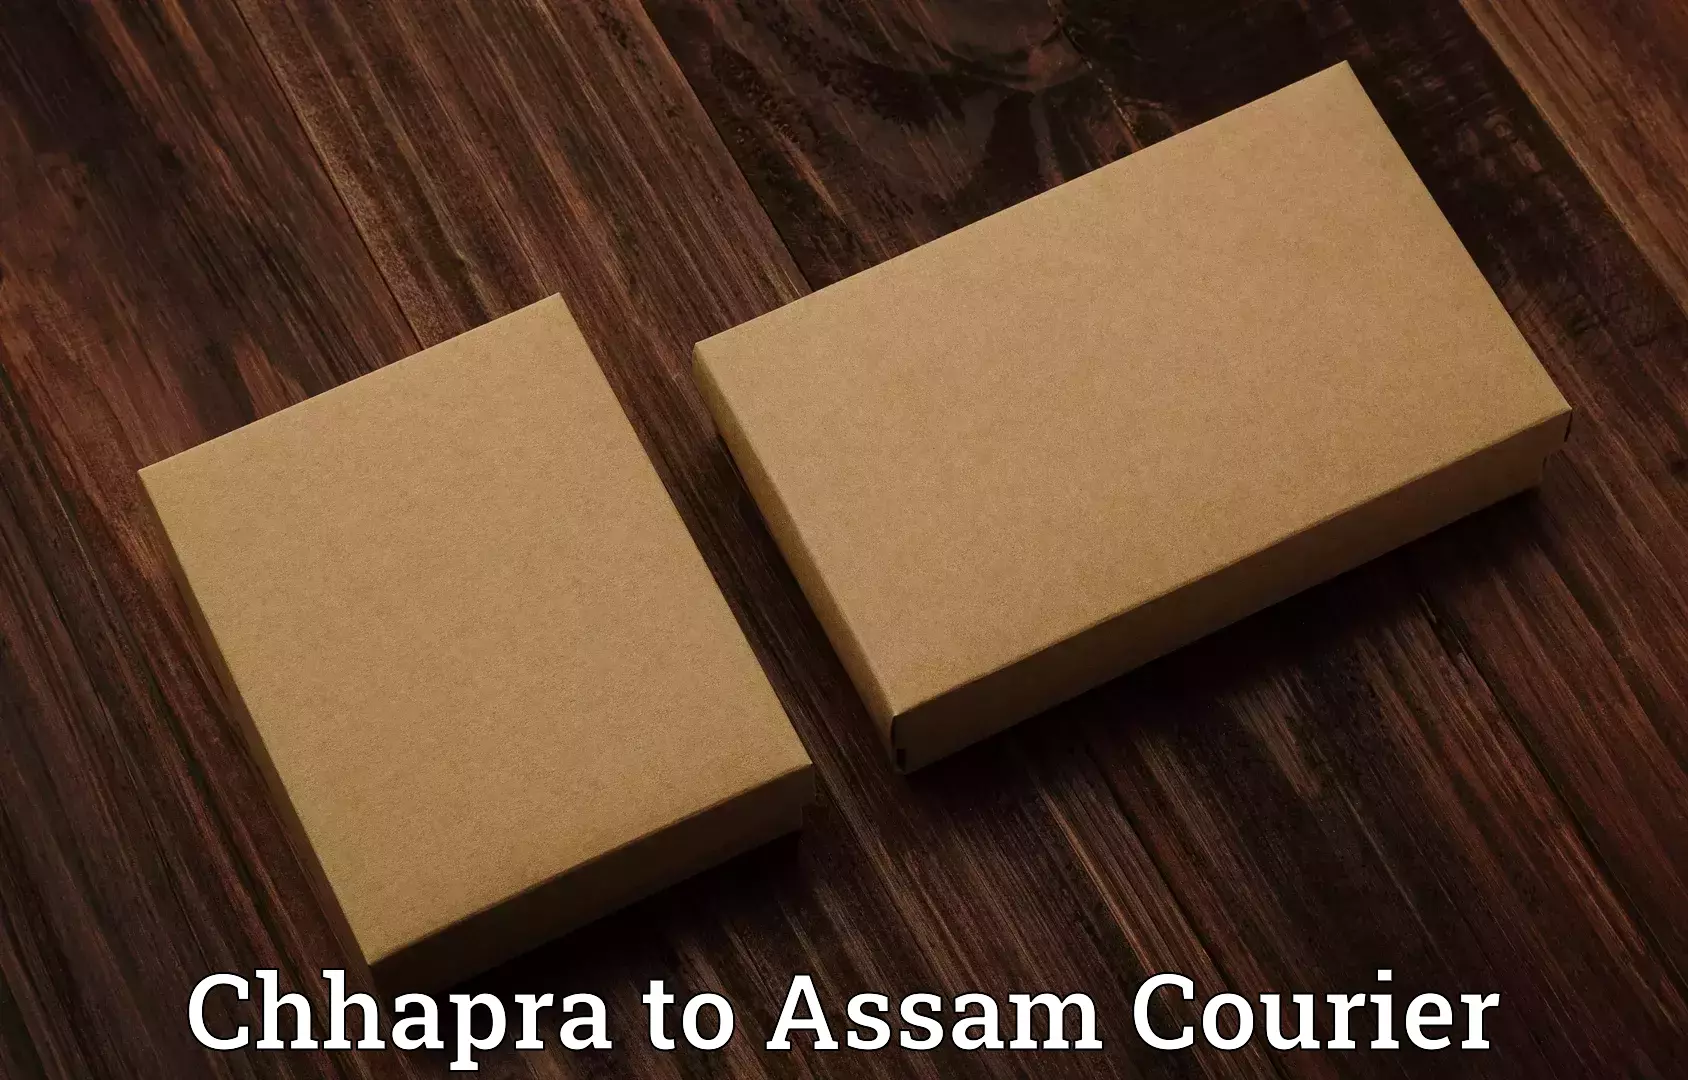 Personal effects shipping in Chhapra to Assam